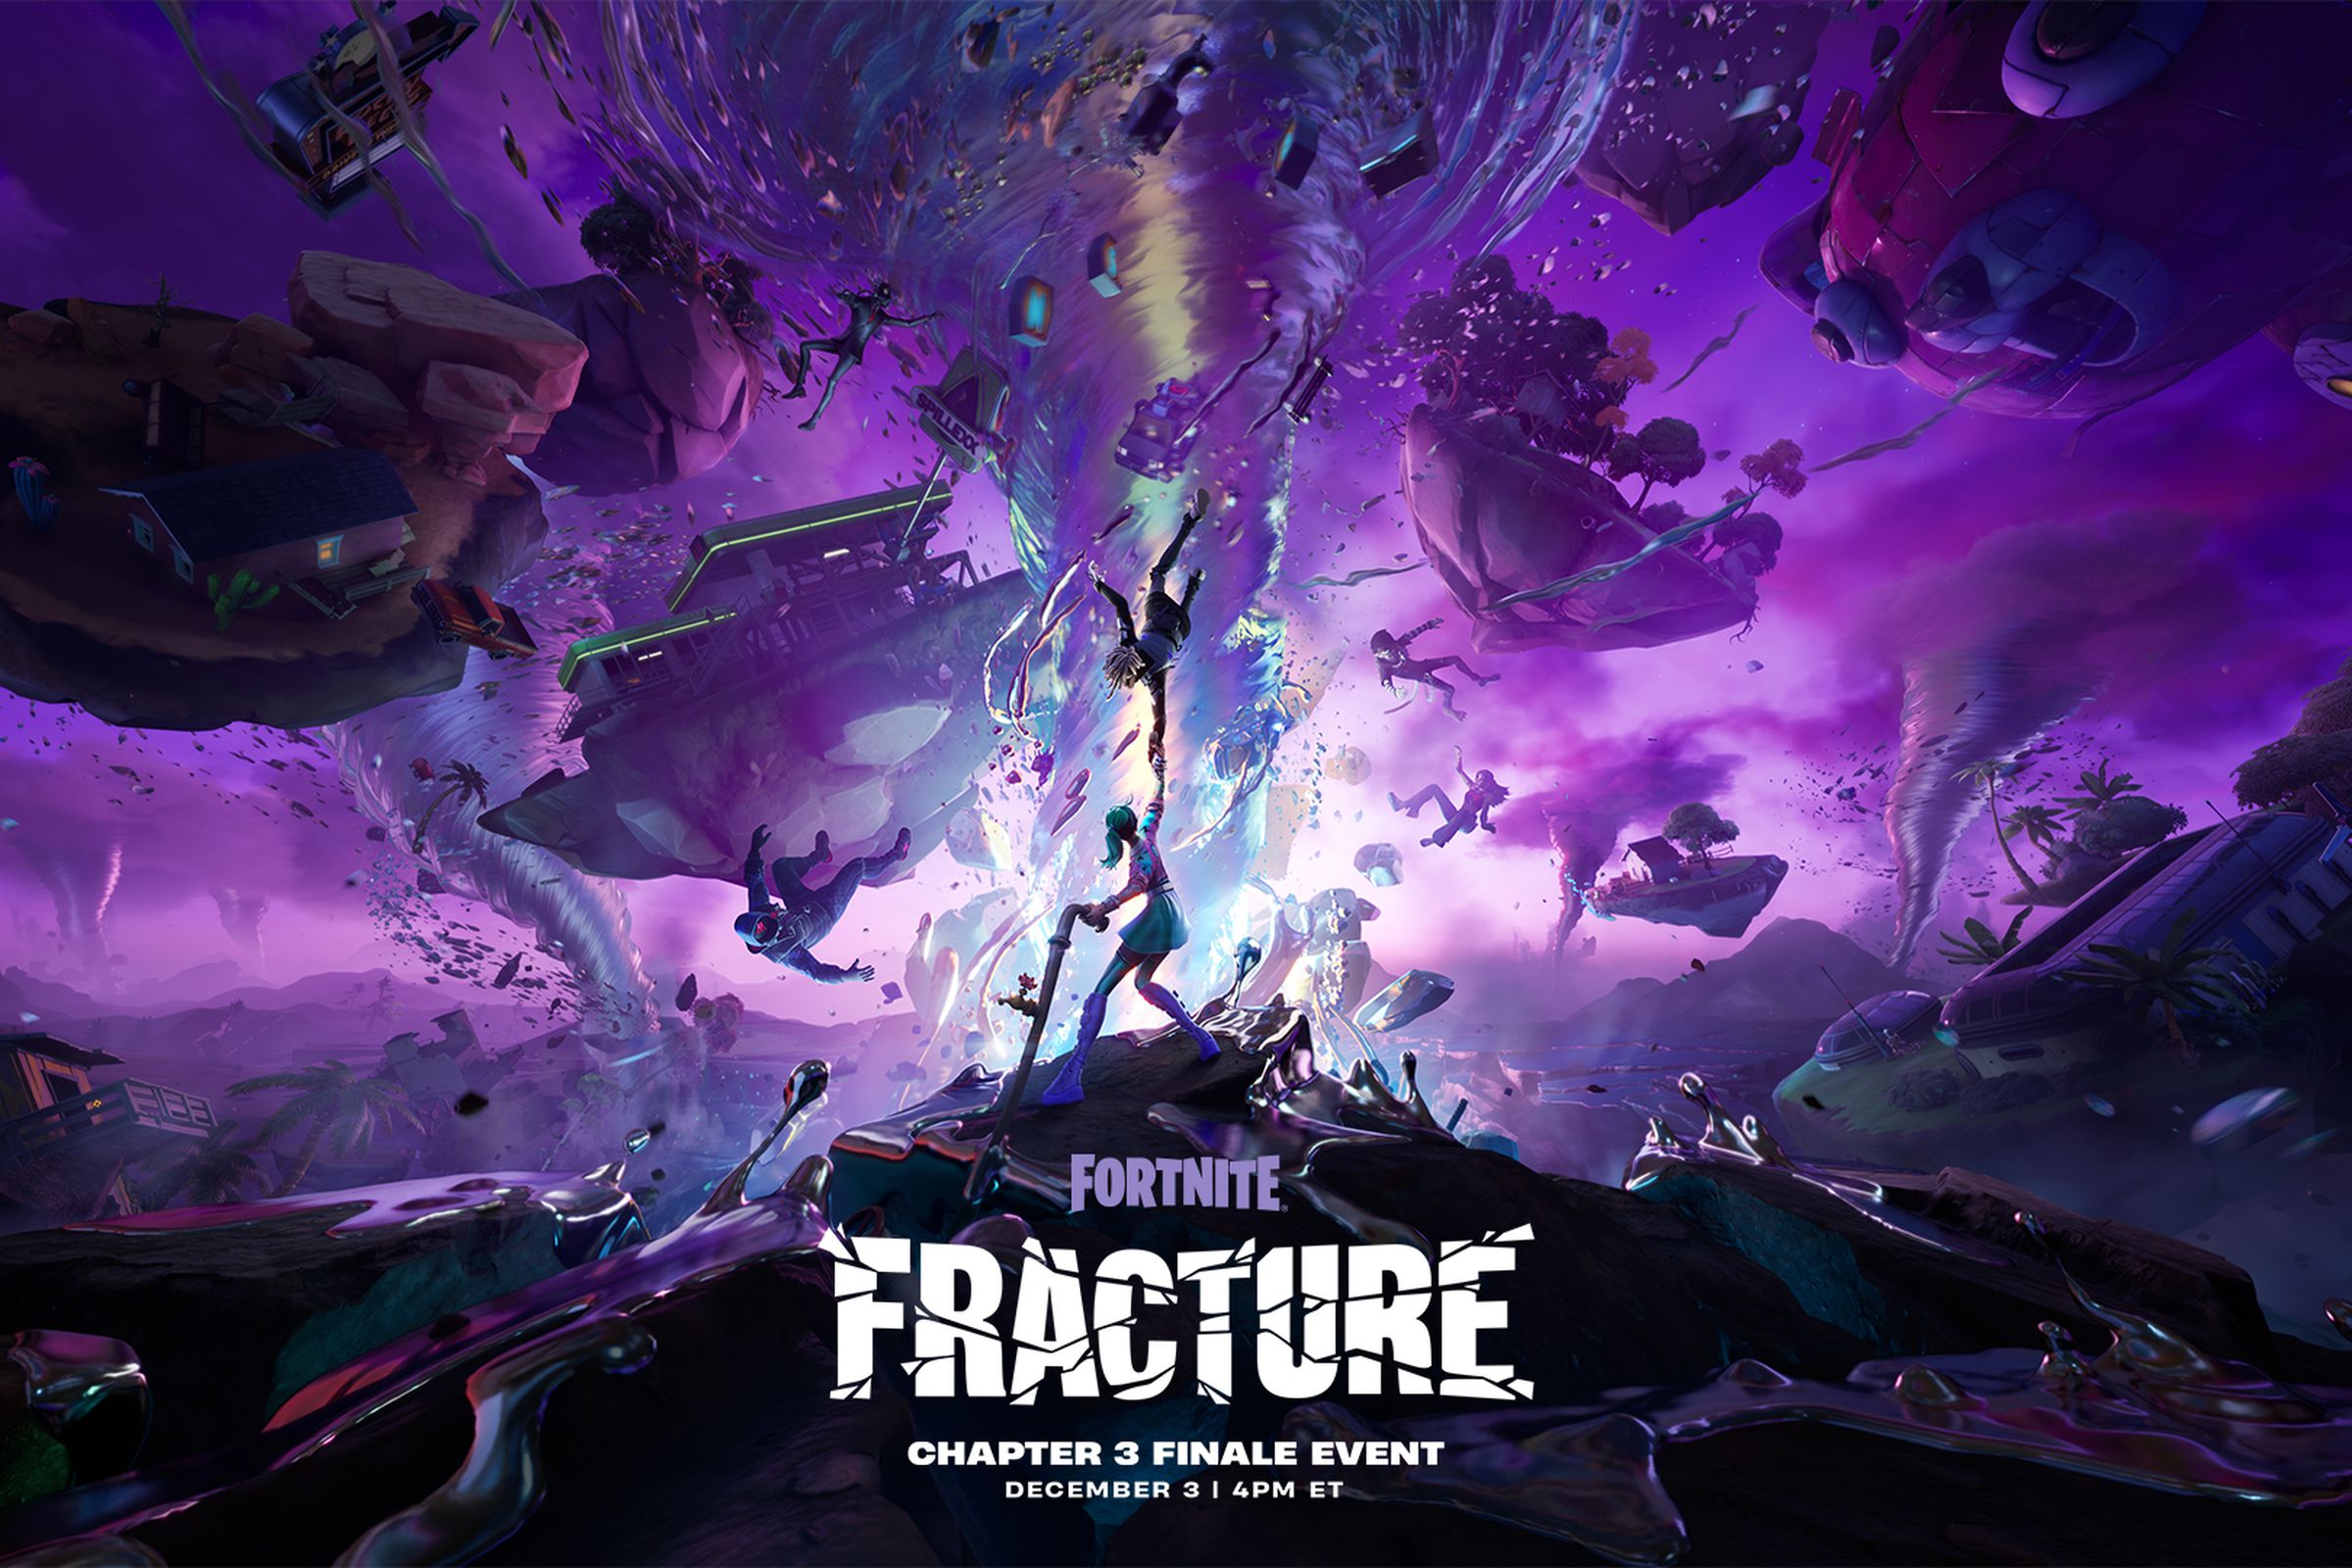 Key art for Fortnite’s “Fracture” live event.